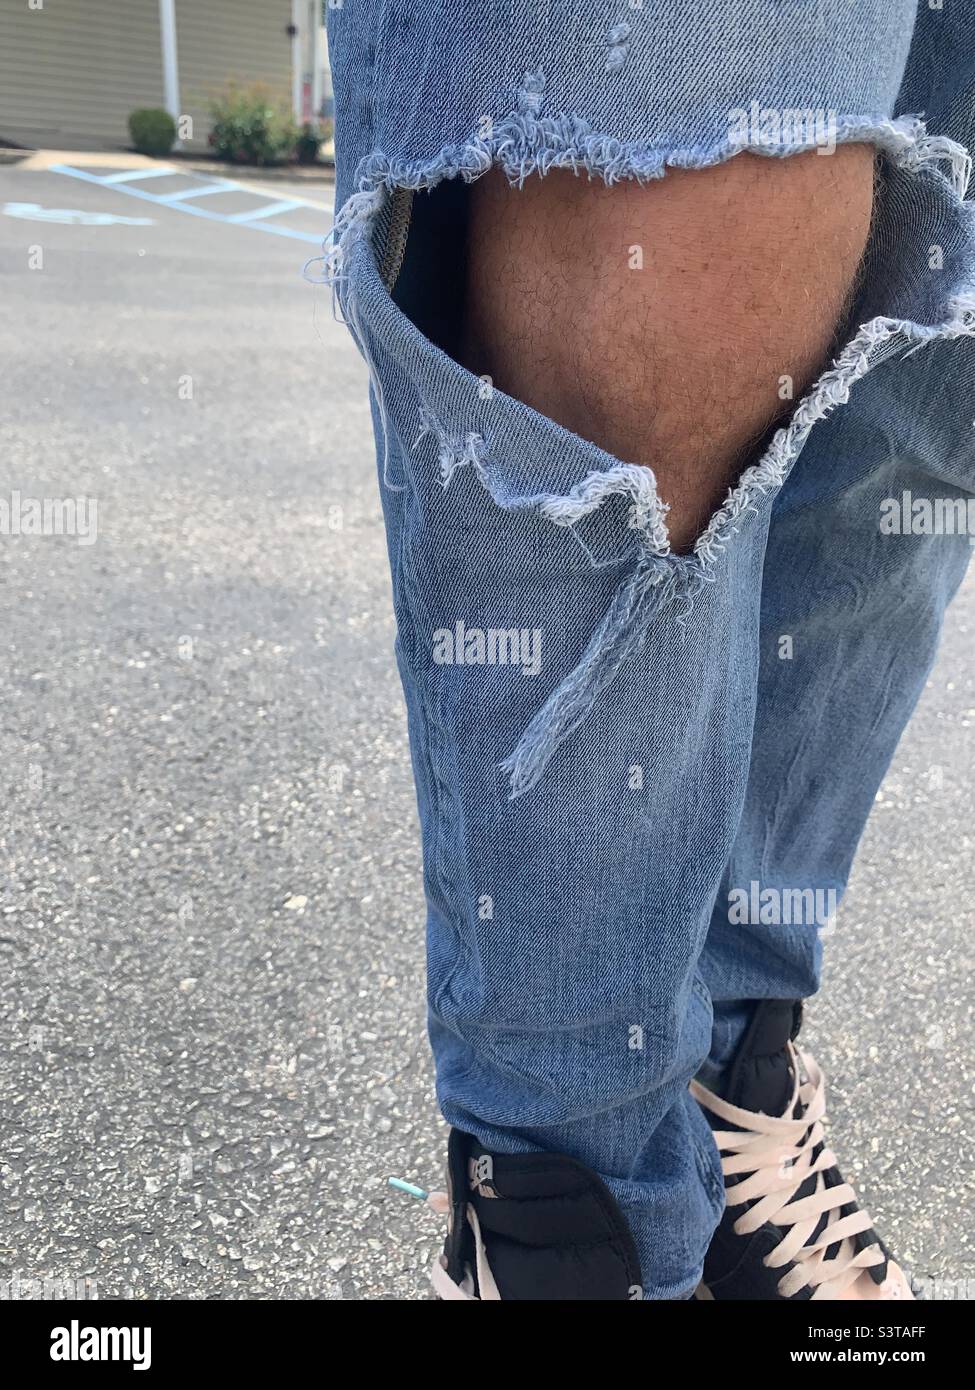 Mans legs wearing blue jeans with ripped knees Stock Photo